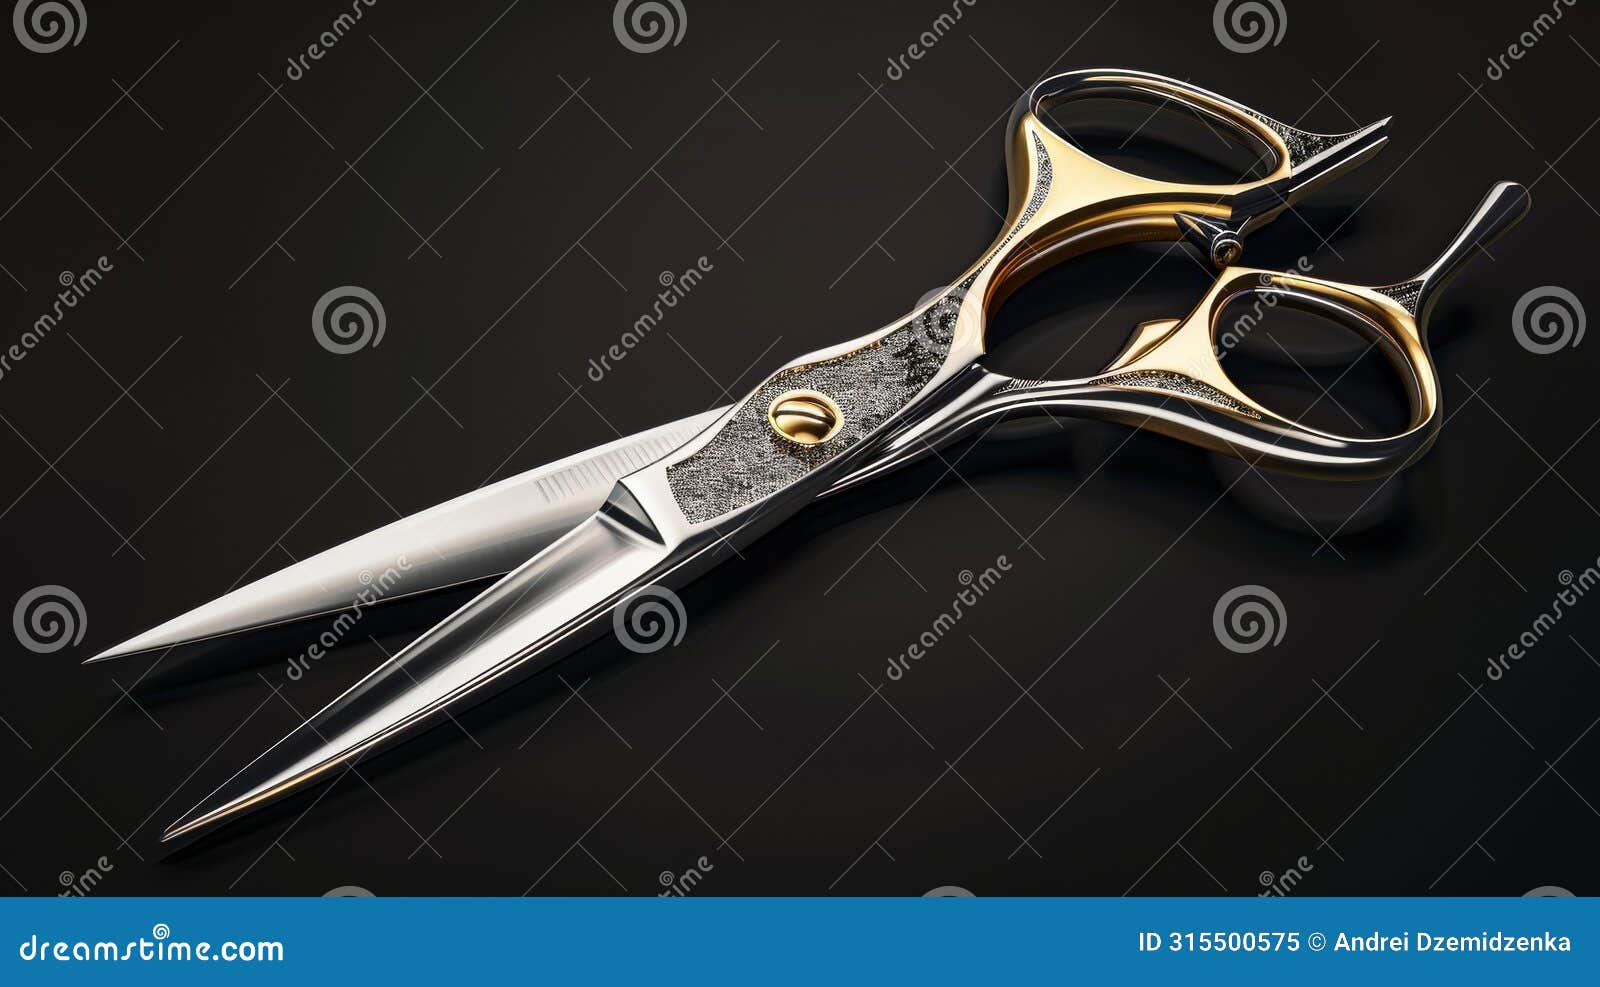 a pair of scissors with open blades in silver and gold metal. barber's stationery for haircutting, beauty salons, or